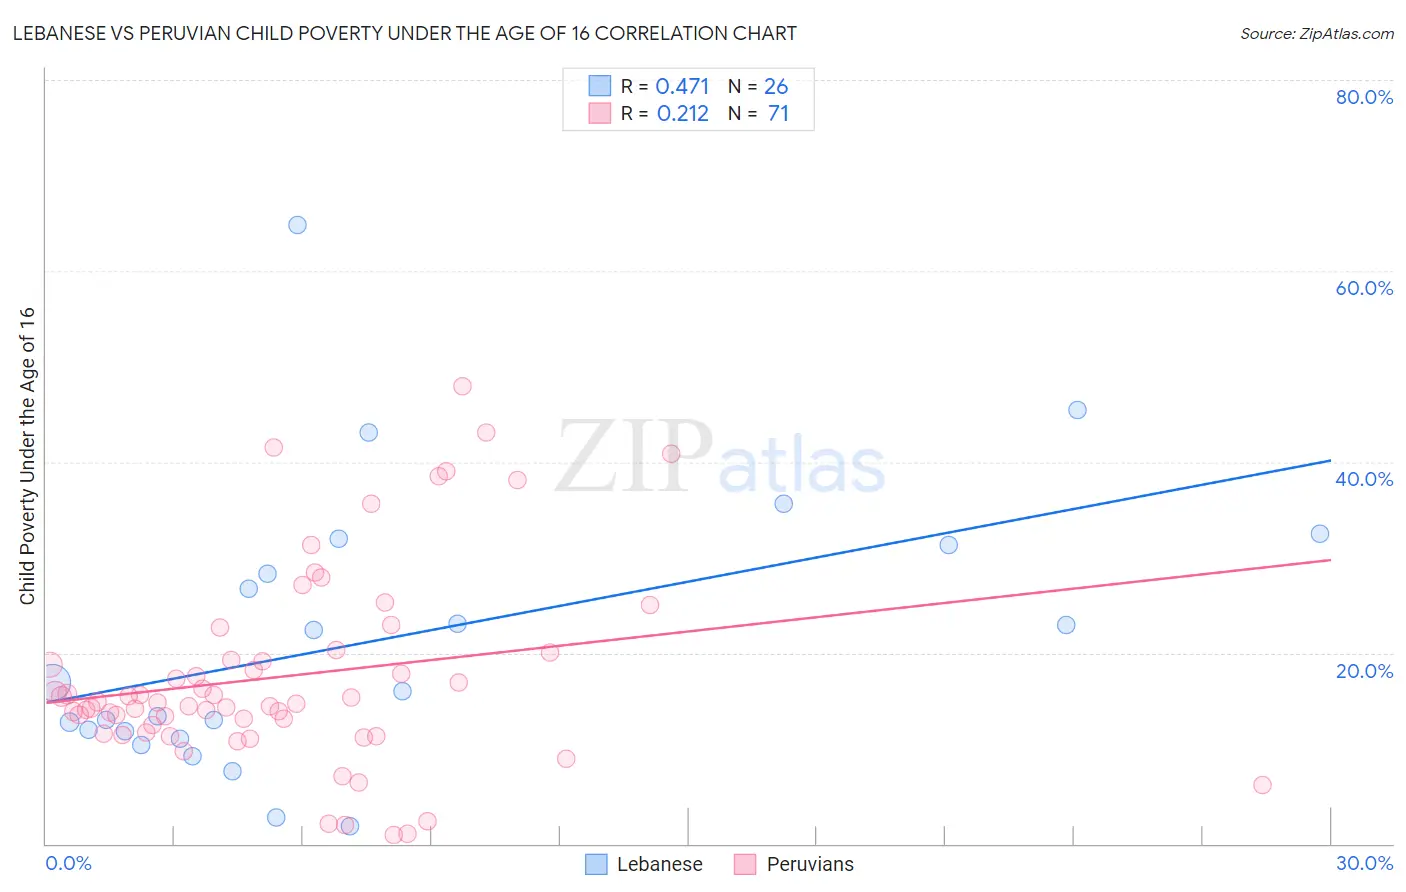 Lebanese vs Peruvian Child Poverty Under the Age of 16